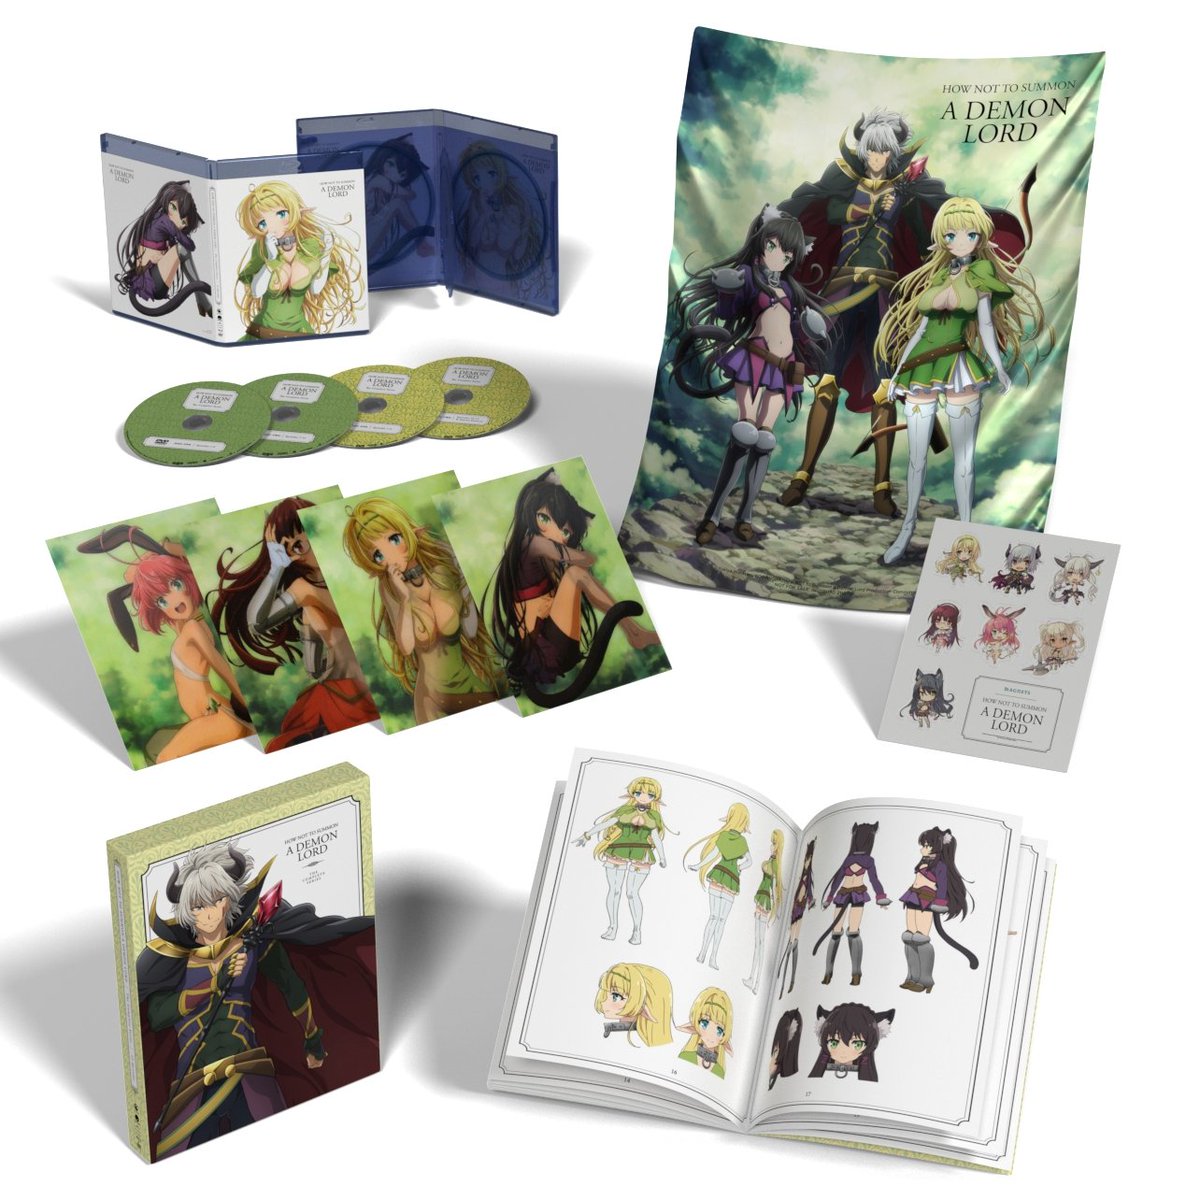 ICYMI, How Not To Summon A Demon Lord Blu-ray/DVD LE preview https...